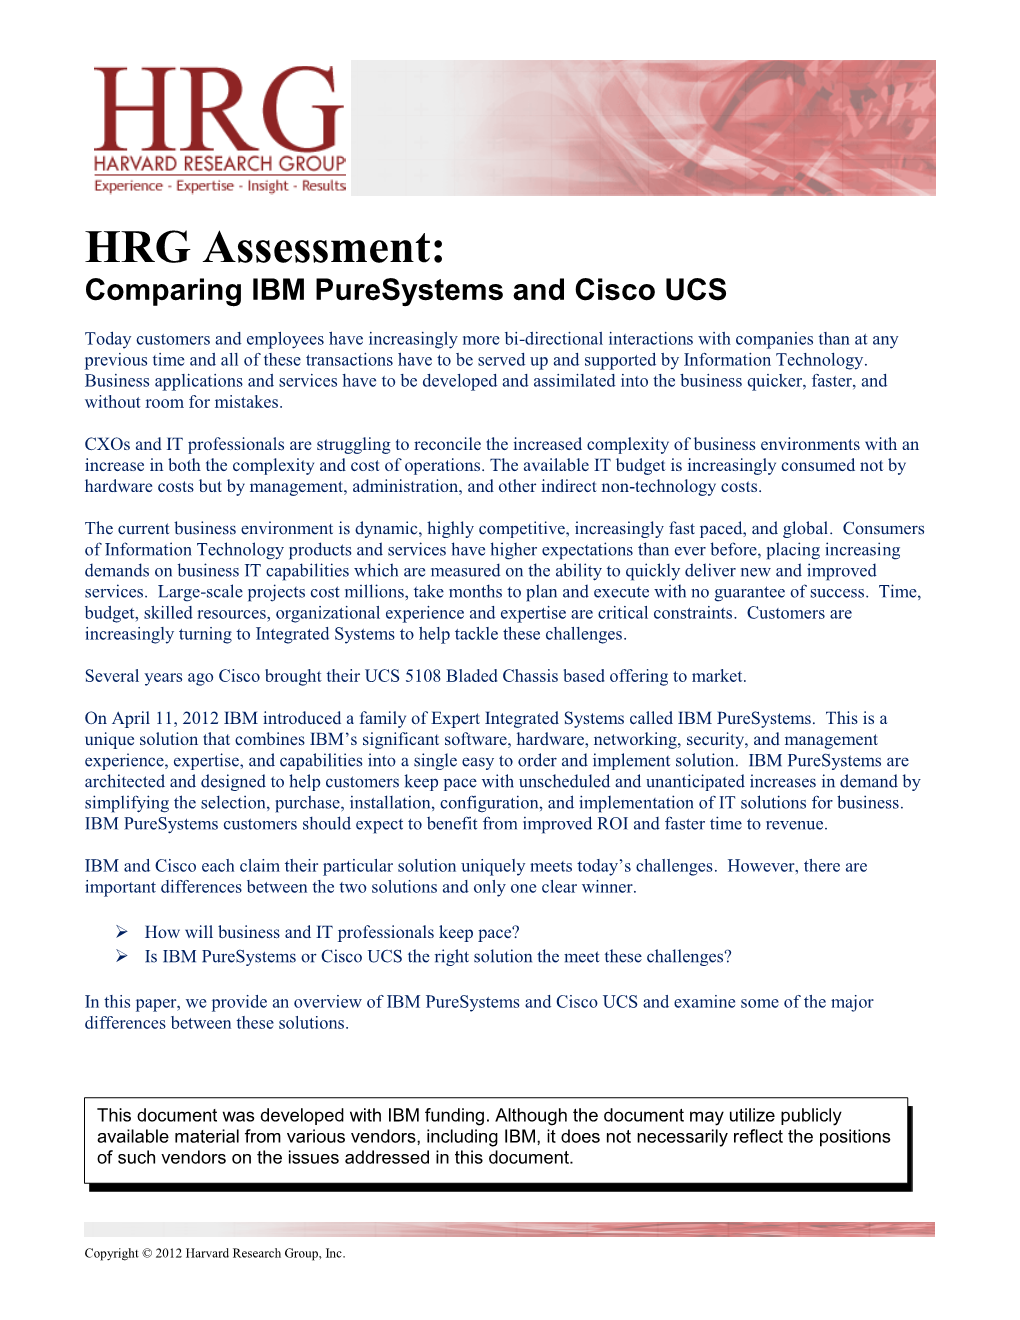 HRG Assessment: Comparing IBM Puresystems and Cisco UCS